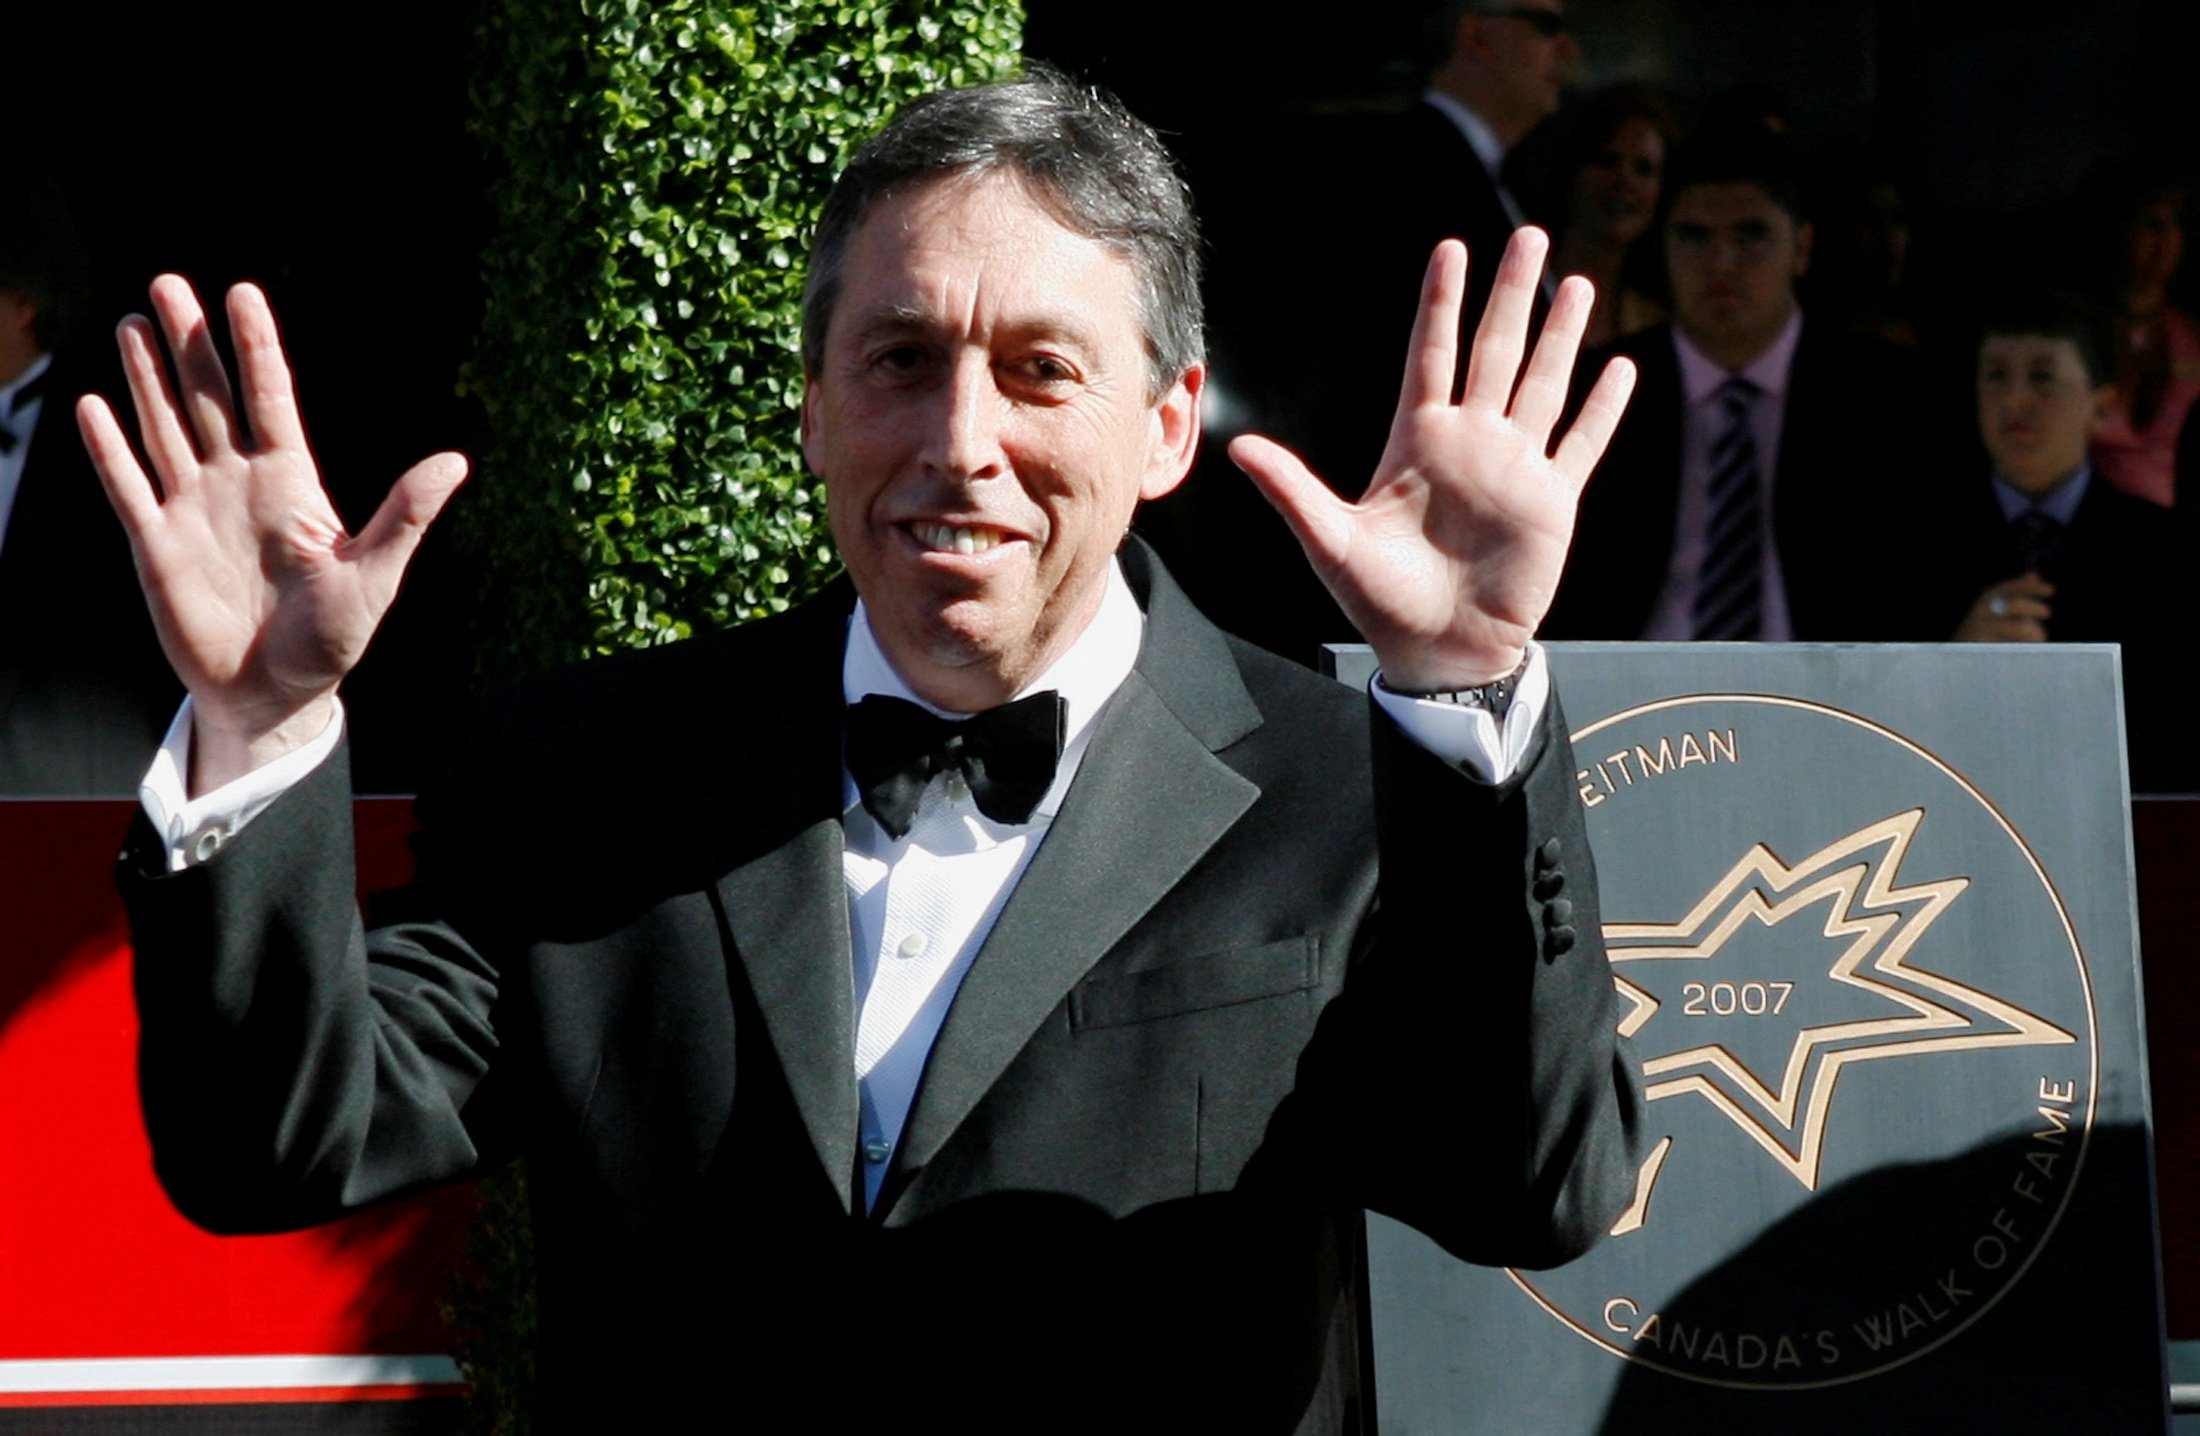 Canadian director-producer Ivan Reitman stands by his star at the 10th annual Canada's Walk of Fame in Toronto, Canada, June 9, 2007. (REUTERS Photo)